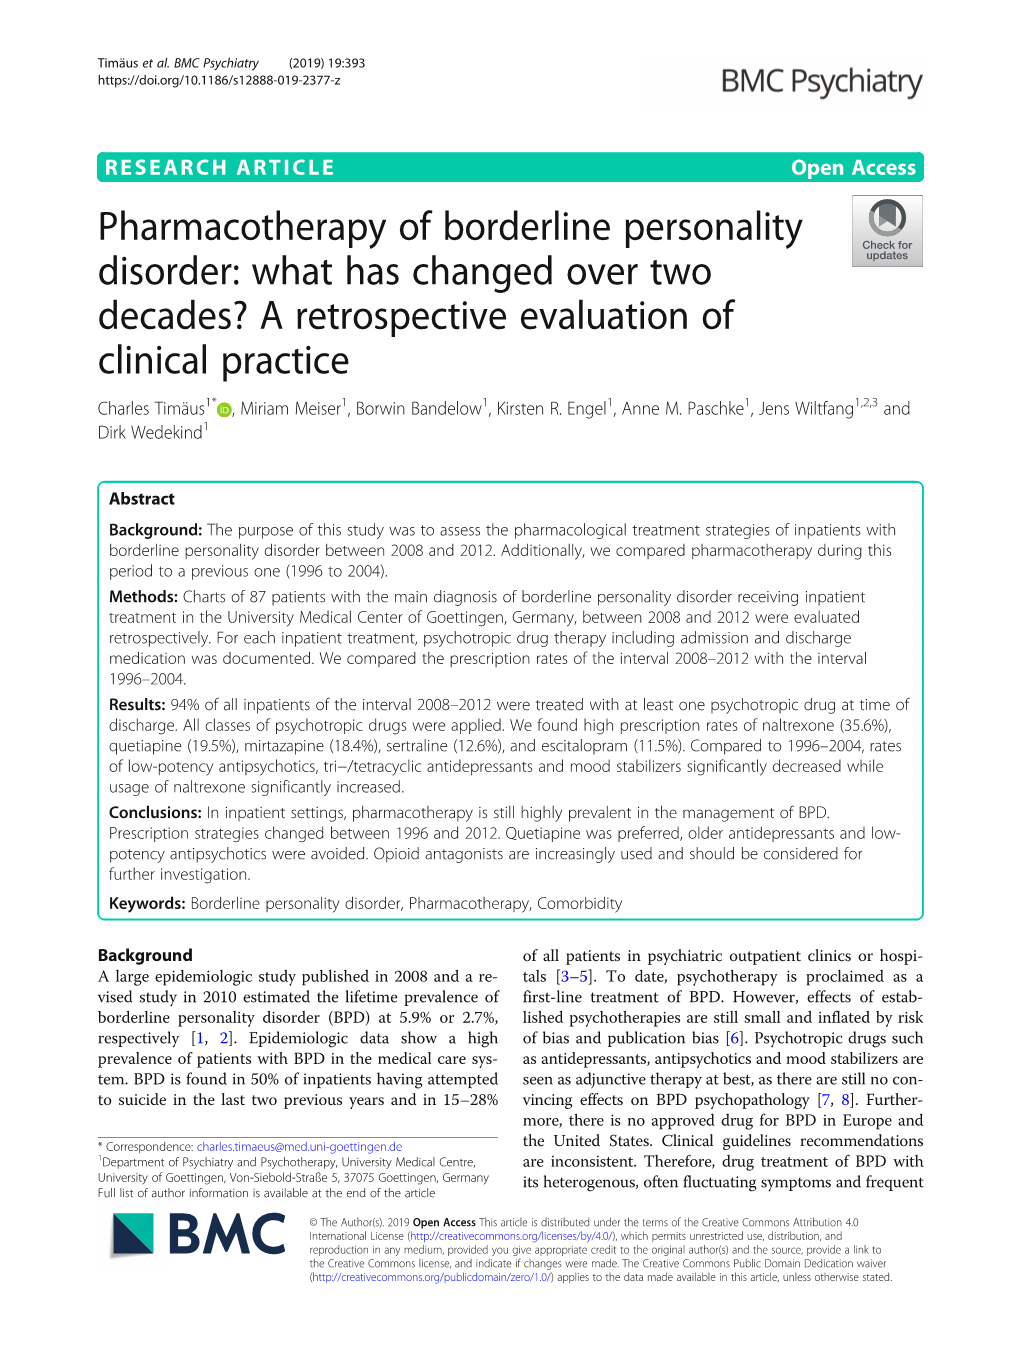 Pharmacotherapy of Borderline Personality Disorder